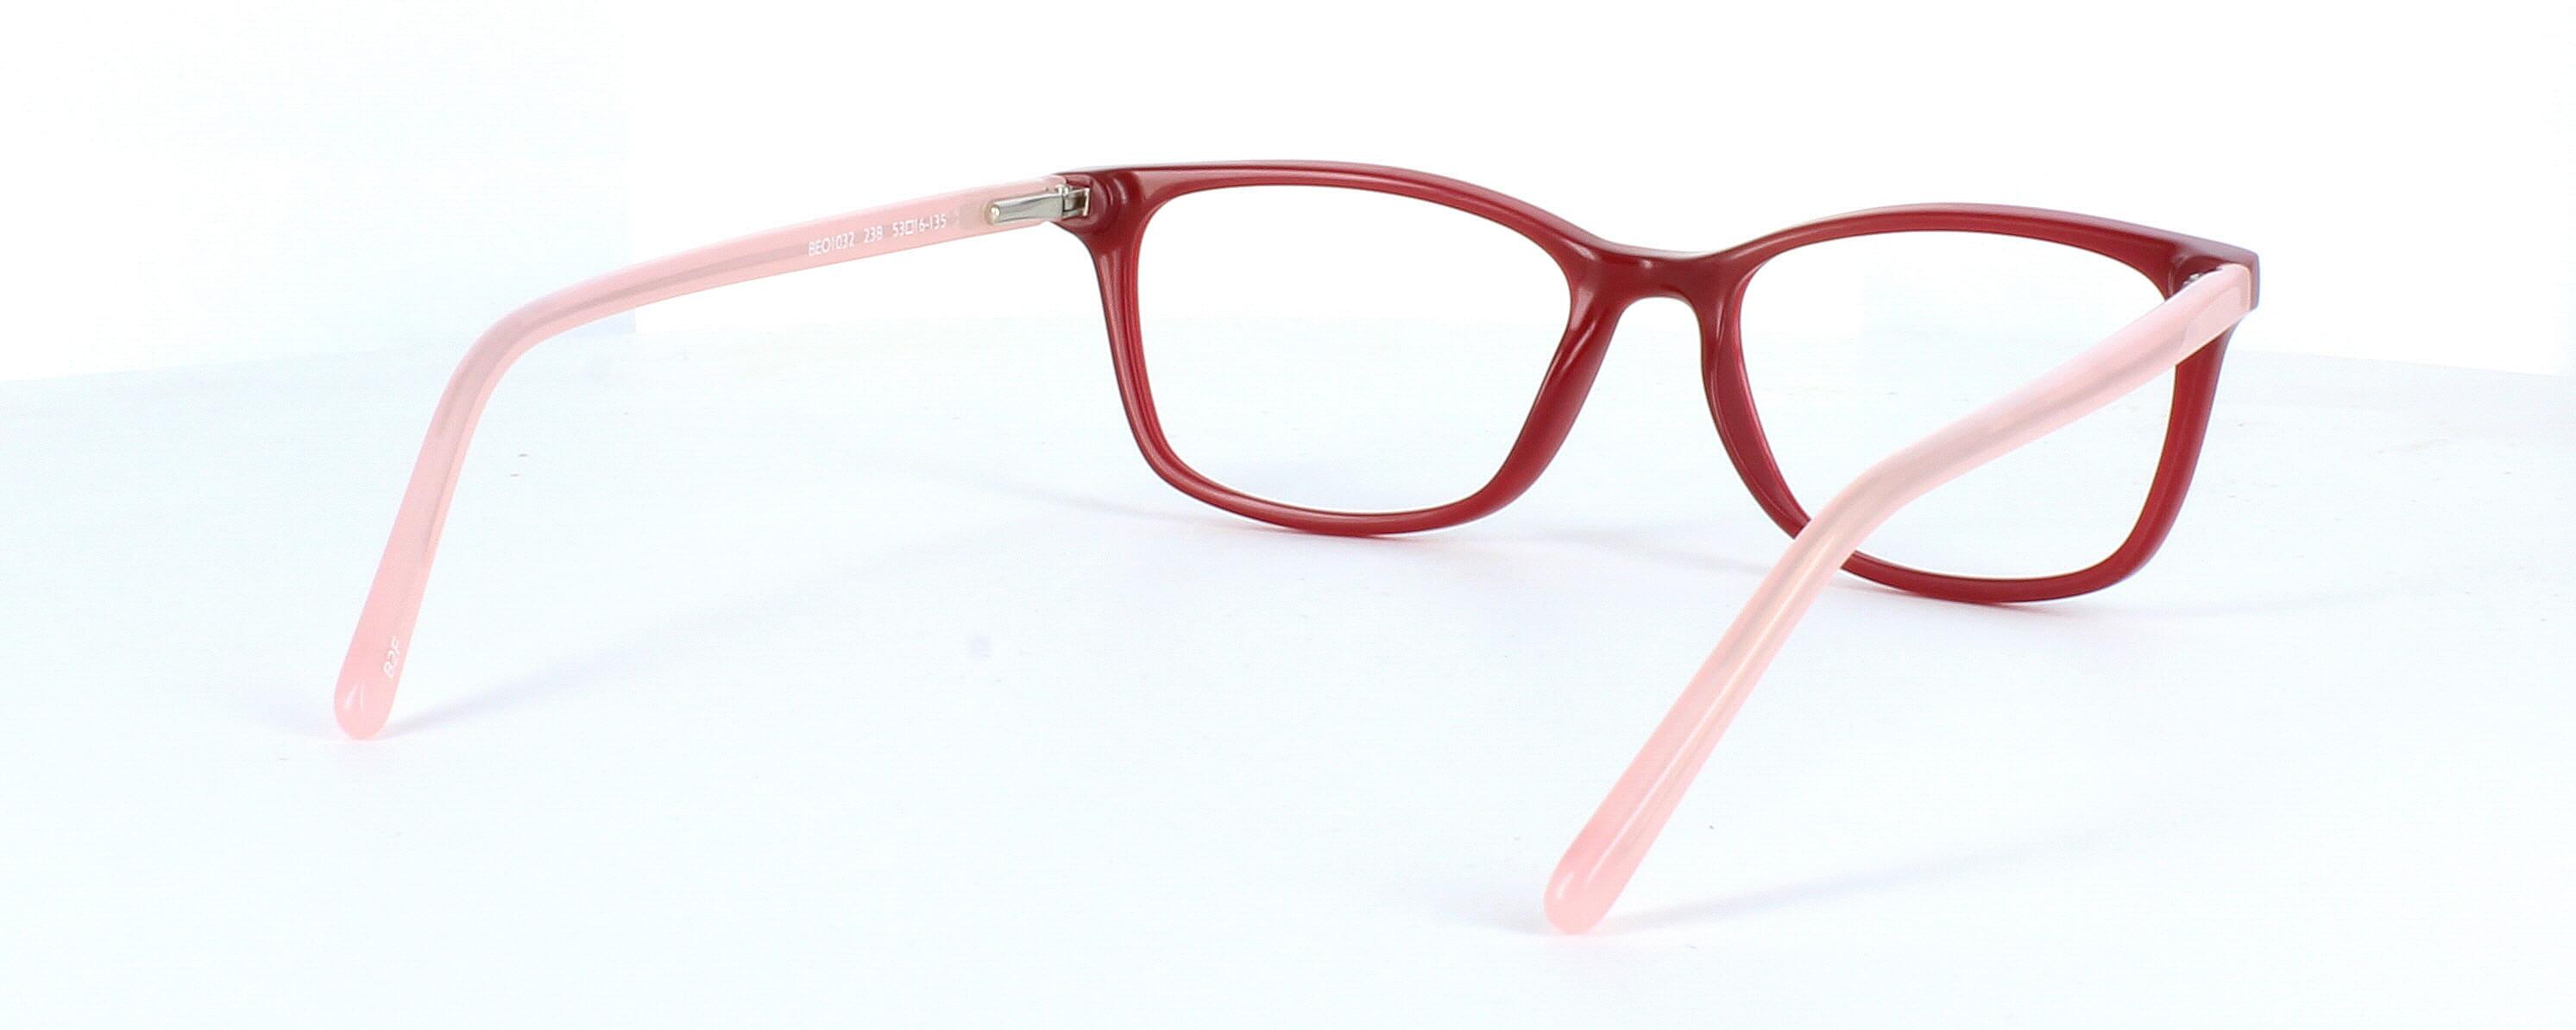 Benetton BEO1032 238 - Women's oval shaped plastic glasses with red front face and pale pink sprung hinged arms - image view 4